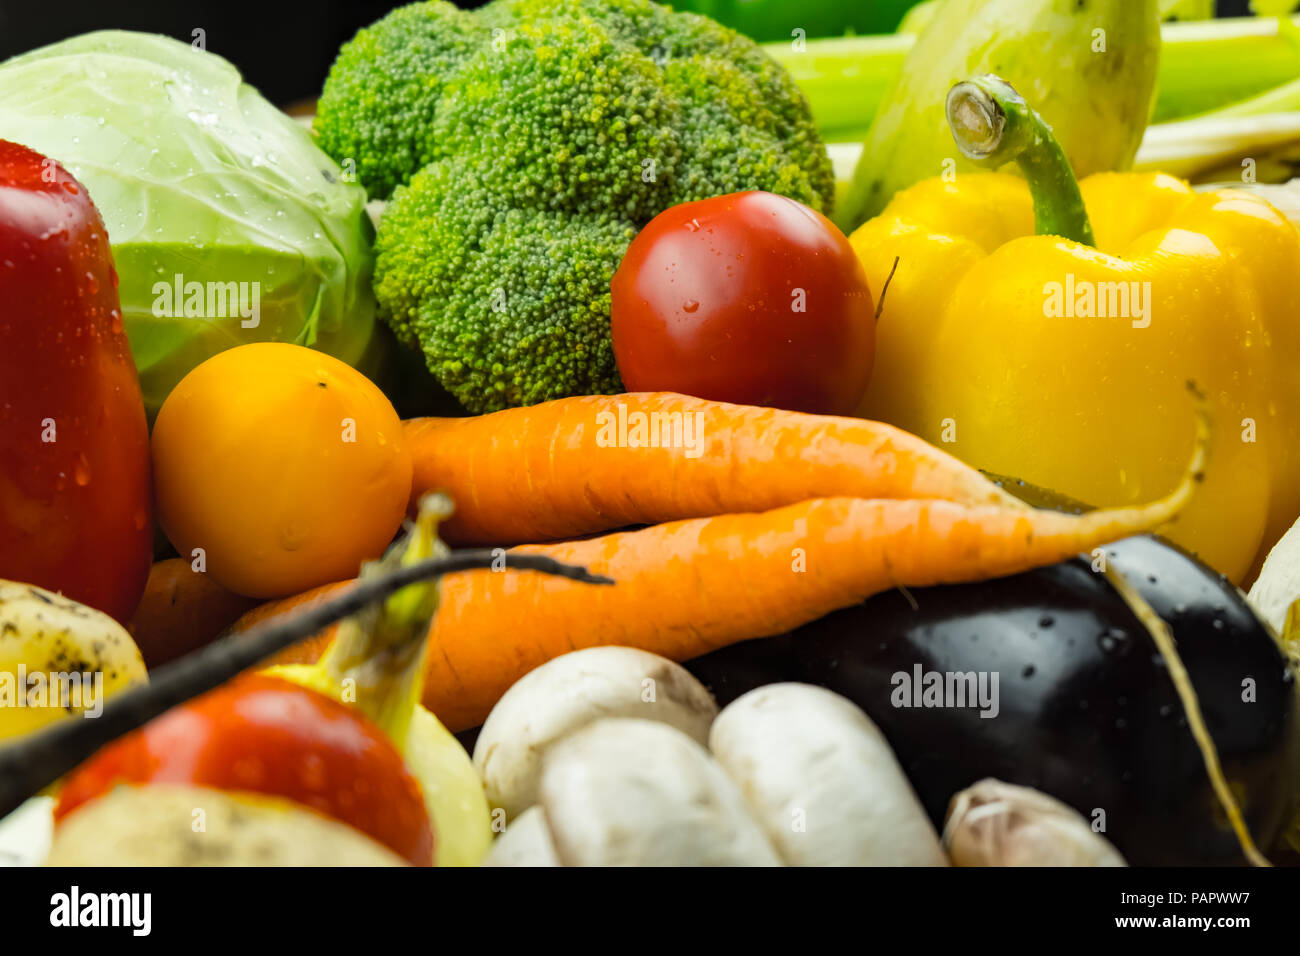 Close-up image of fresh organic vegetables. Locally grown bell pepper, corn, carrot, mushrooms and other natural vegan food laying on table. Stock Photo